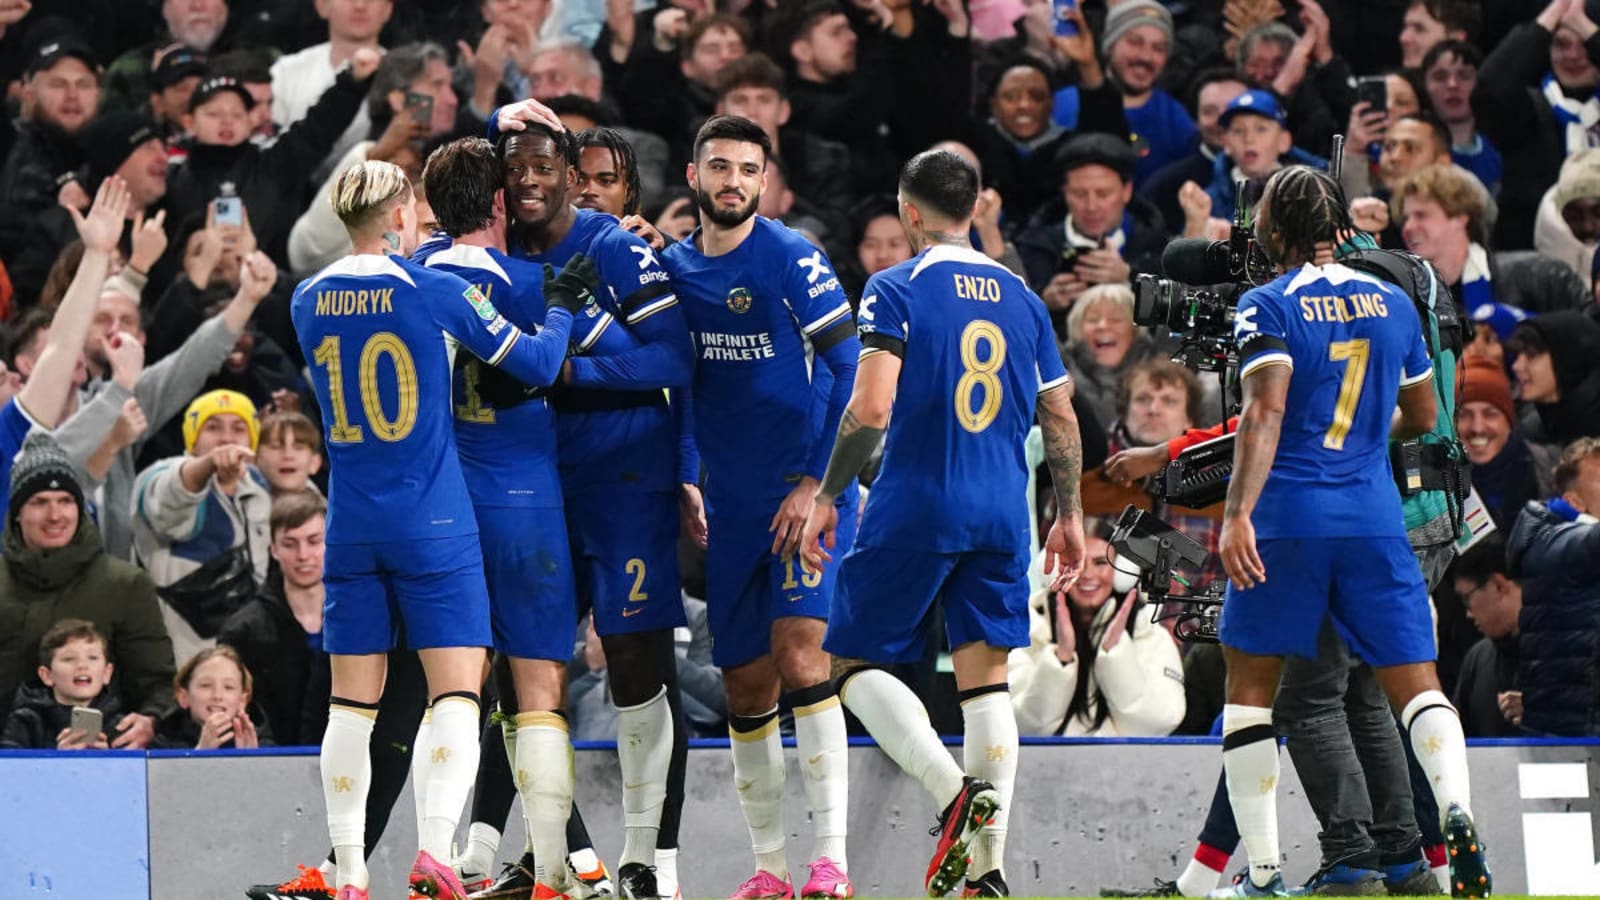 Chelsea Reach 10th League Cup Final After Record-Tying Win Over Middlesbrough